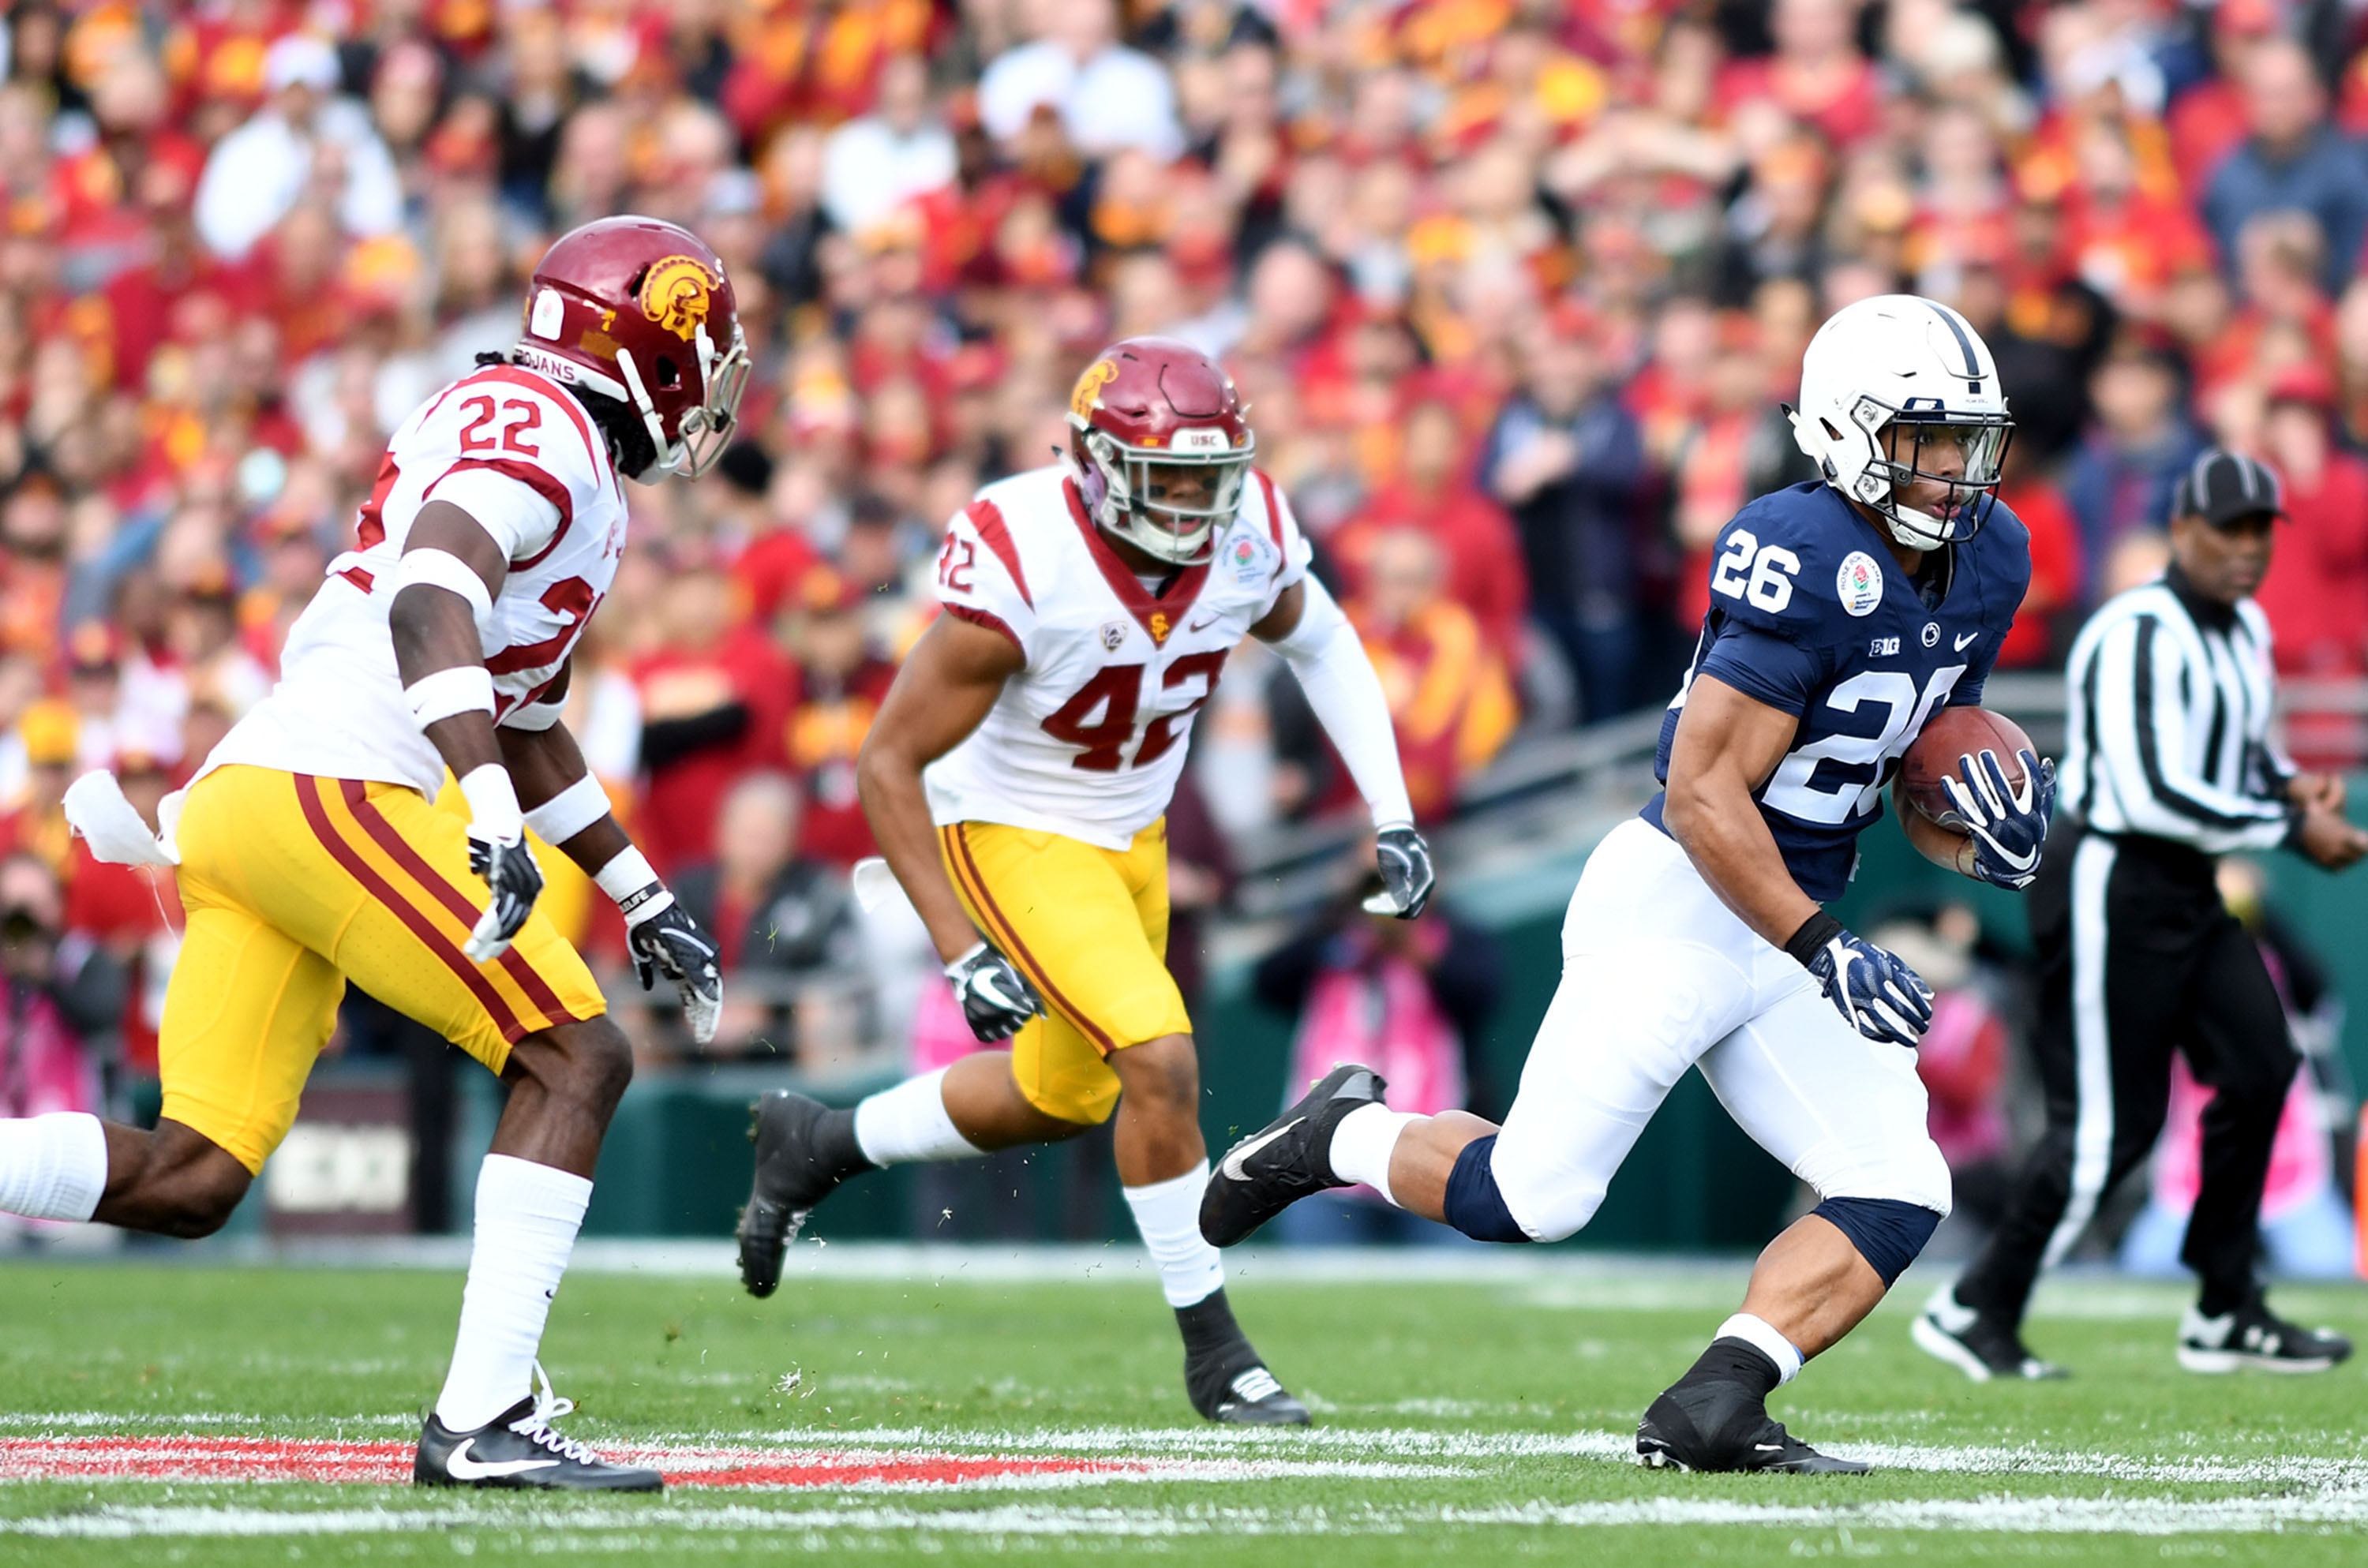 From The Archives: Penn State At The Rose Bowl